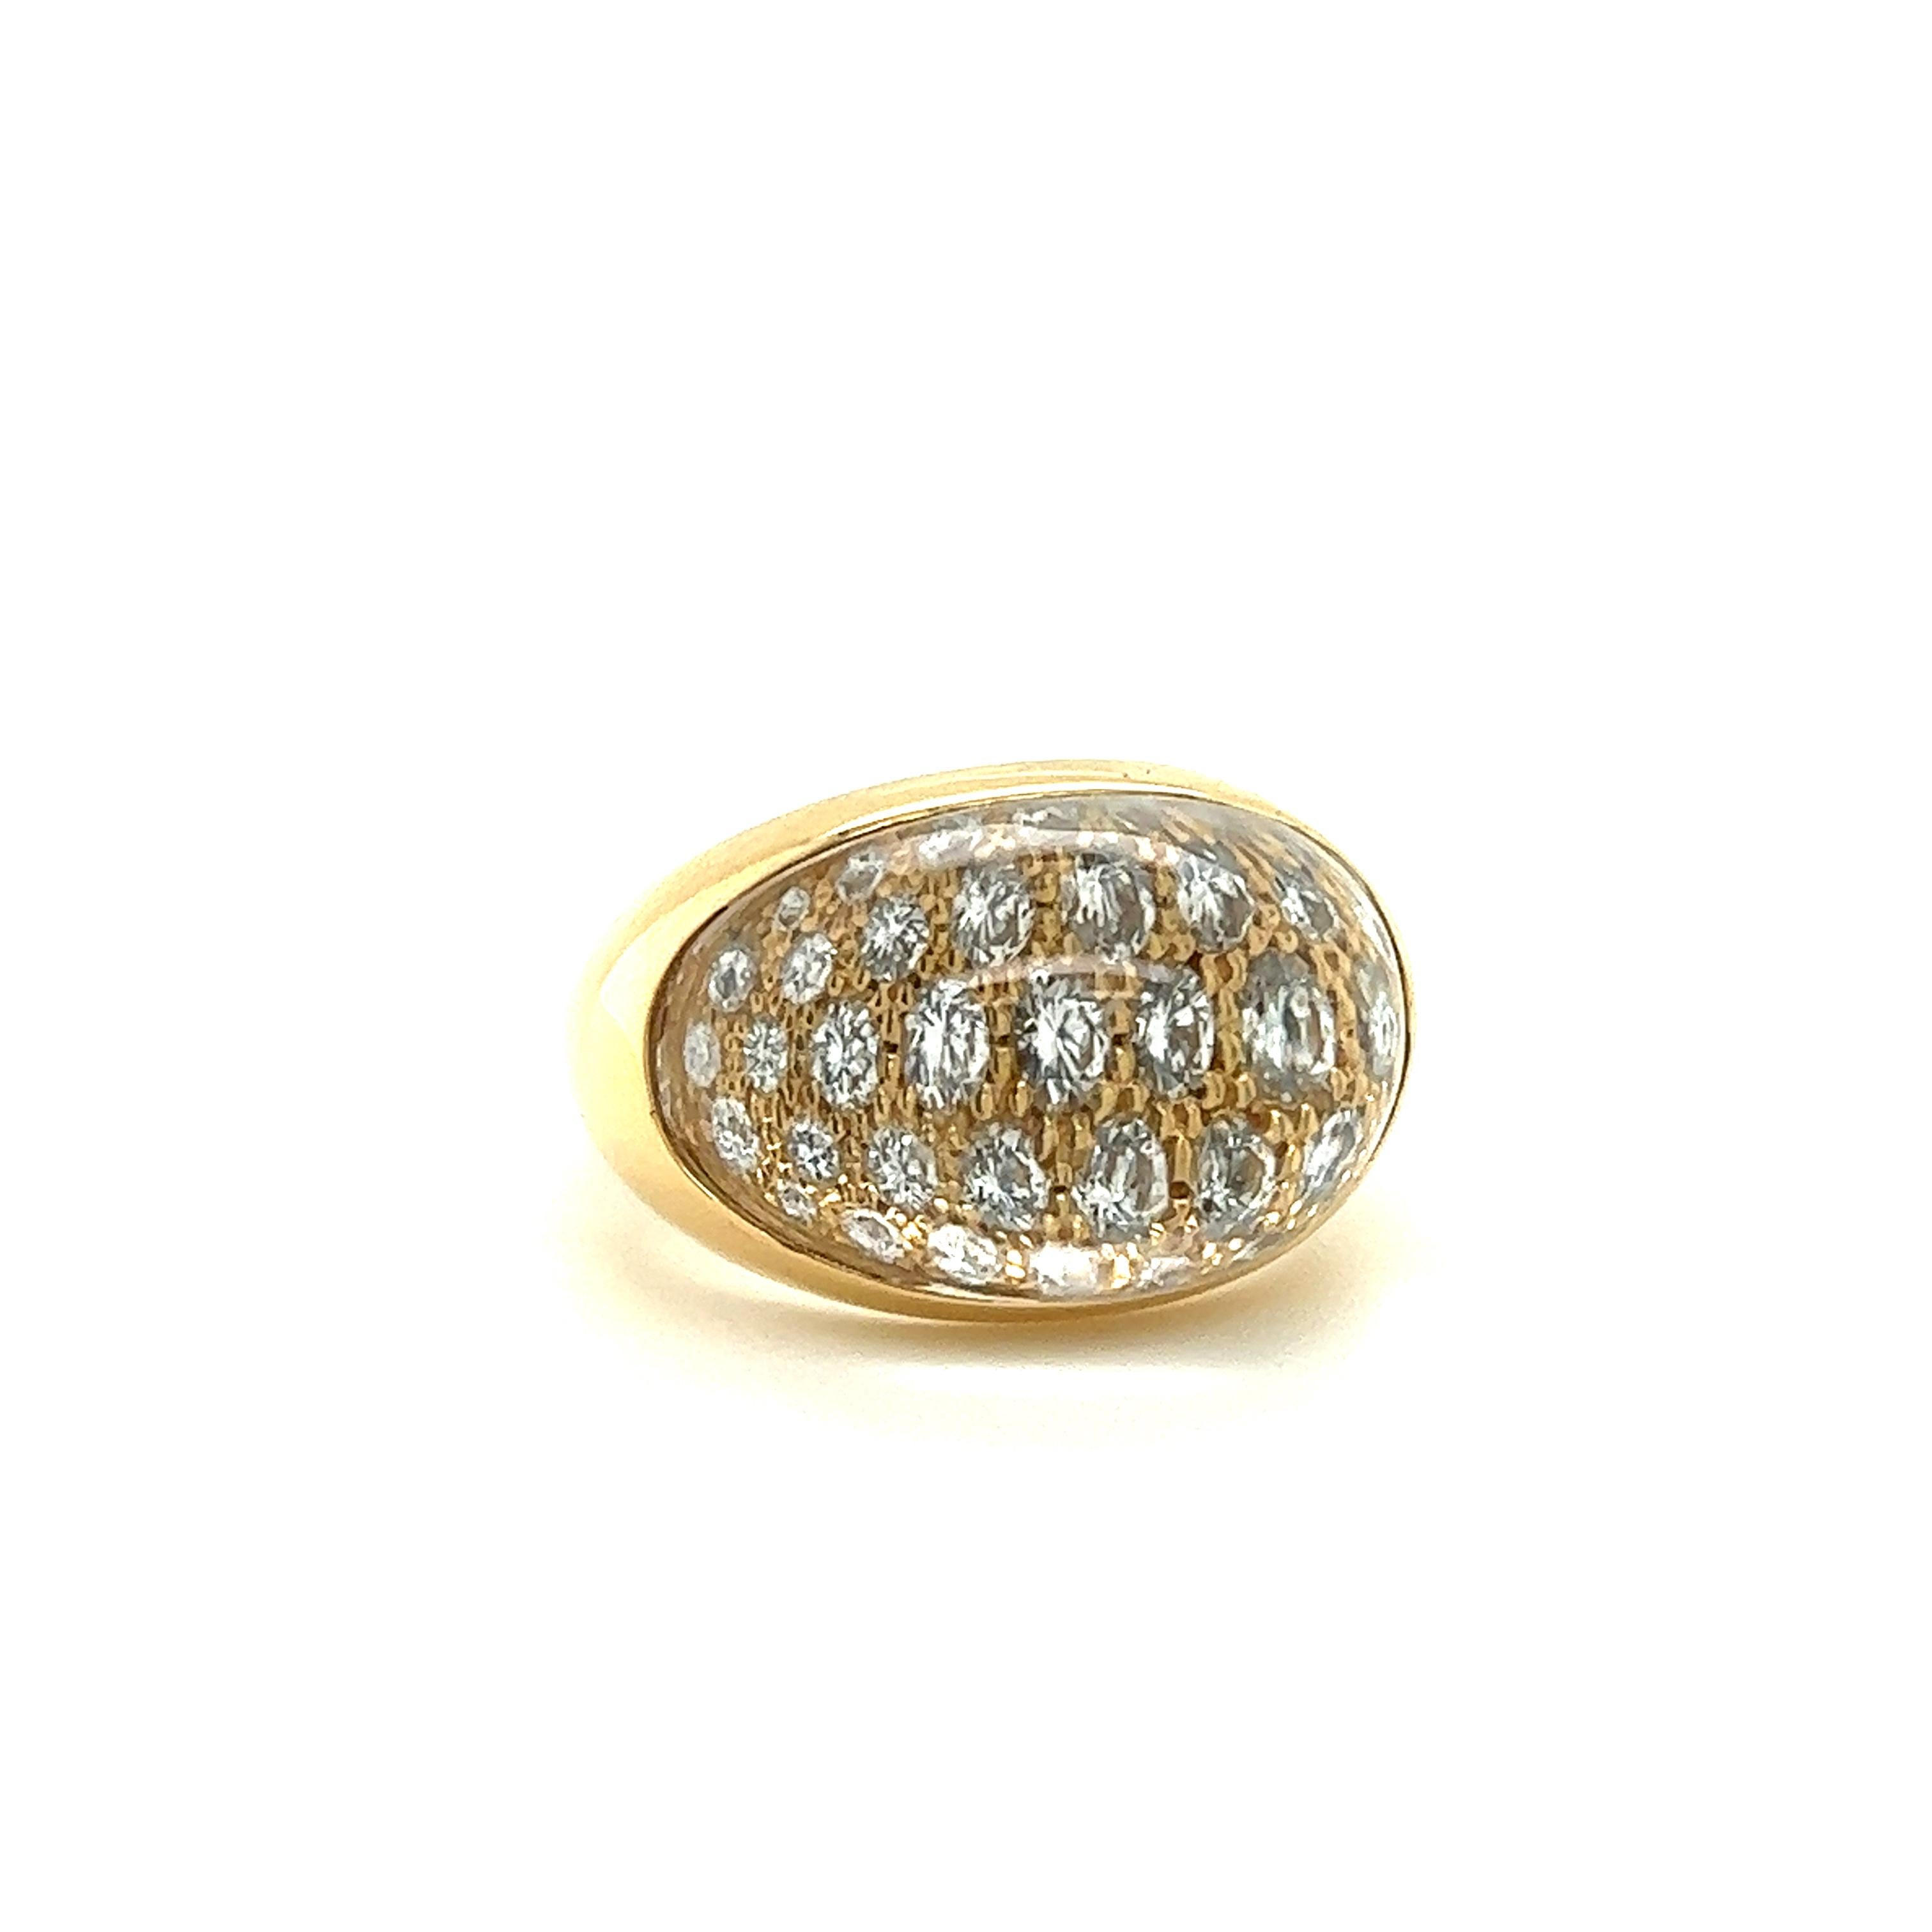 One elegant ring crafted by famed designer Cartier. The ring is from the Myst De Cartier collection, and is crafted in 18k yellow gold. The ring is a unique design as it highlights round brilliant cut diamonds that are set with a cabochon cut quartz